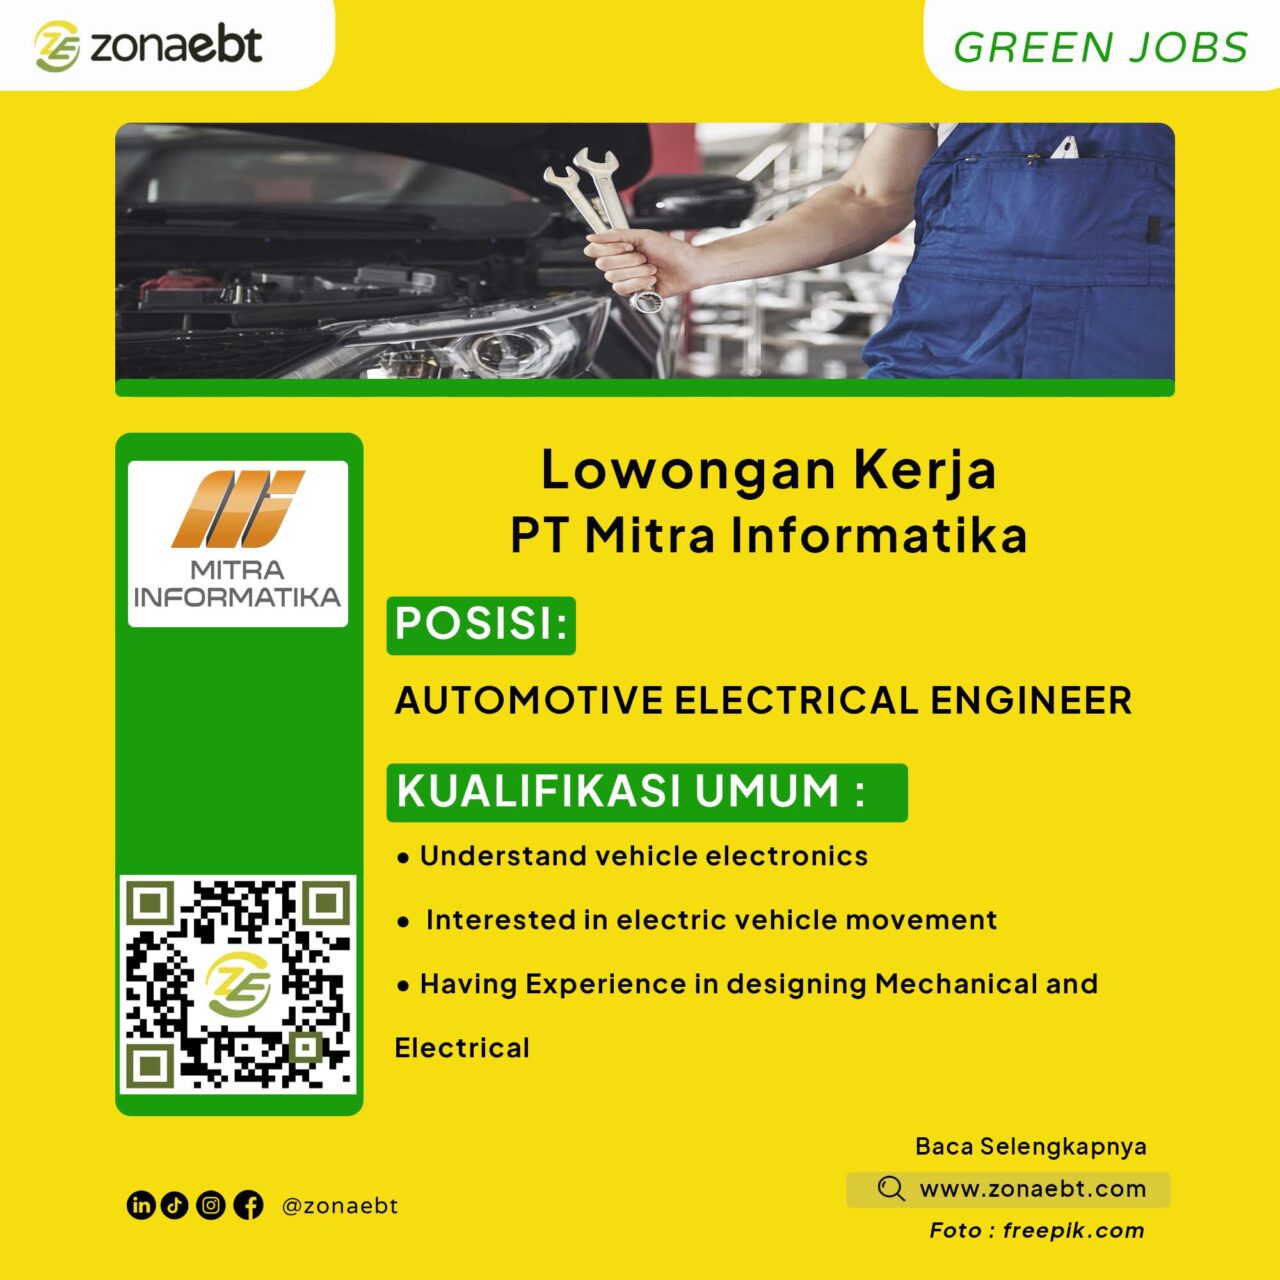 Automotive Electrical Engineer